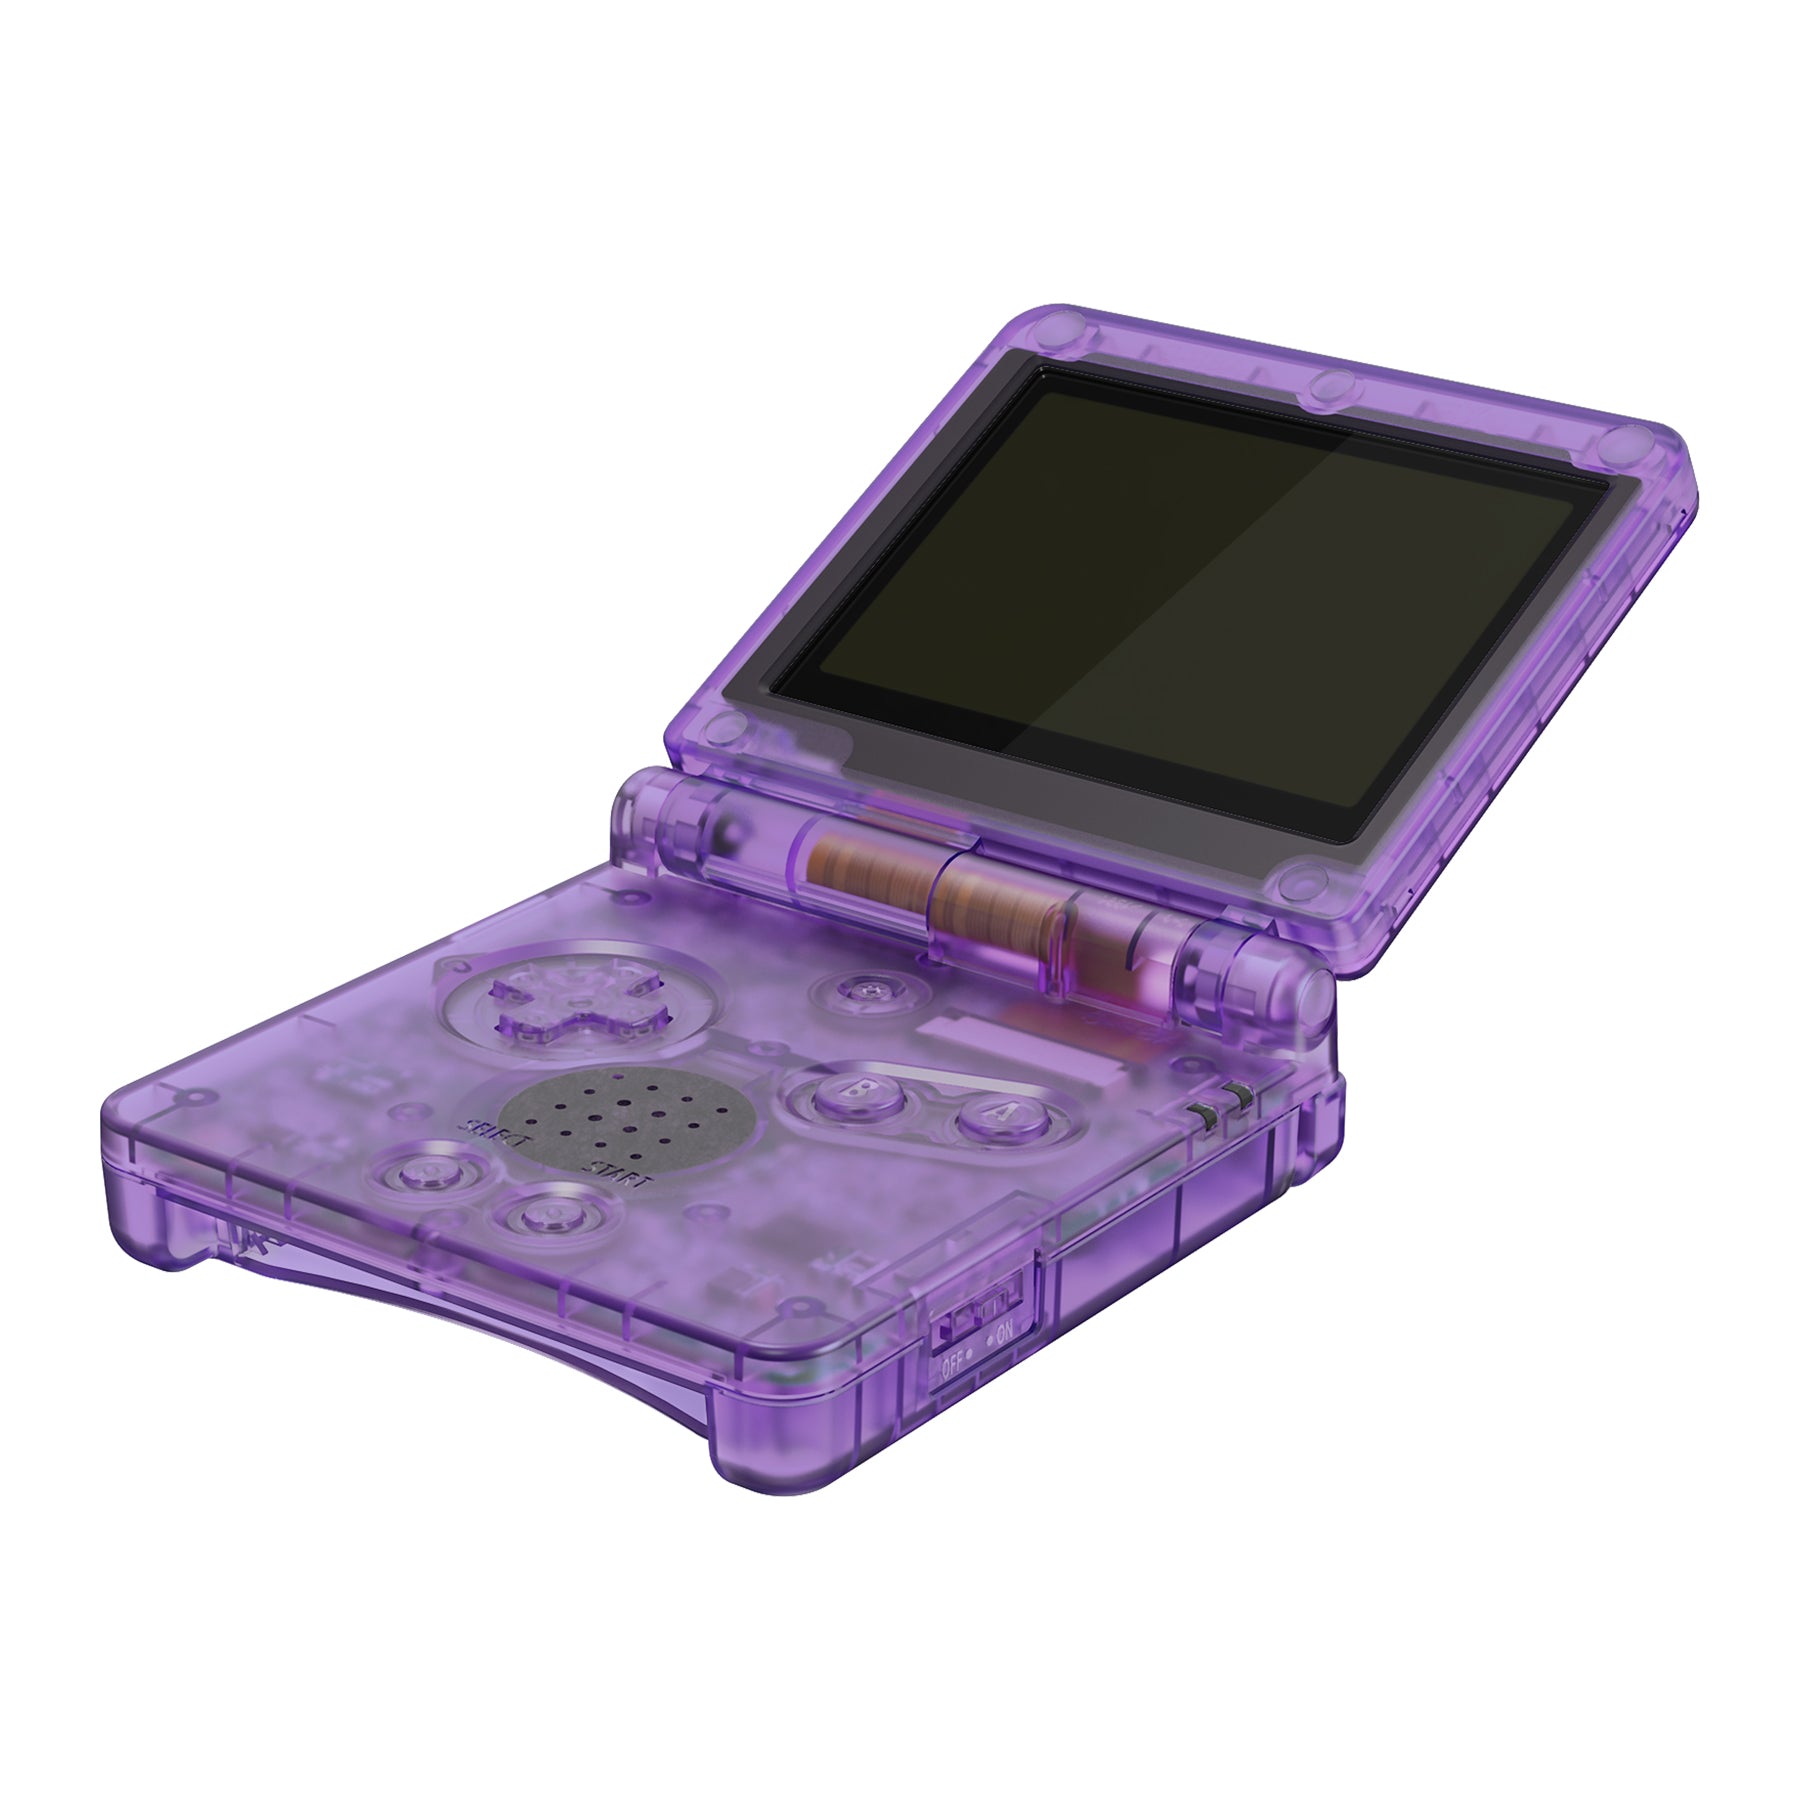 1998 Authentic Atomic Purple Clear Gameboy Color - REQUIRES